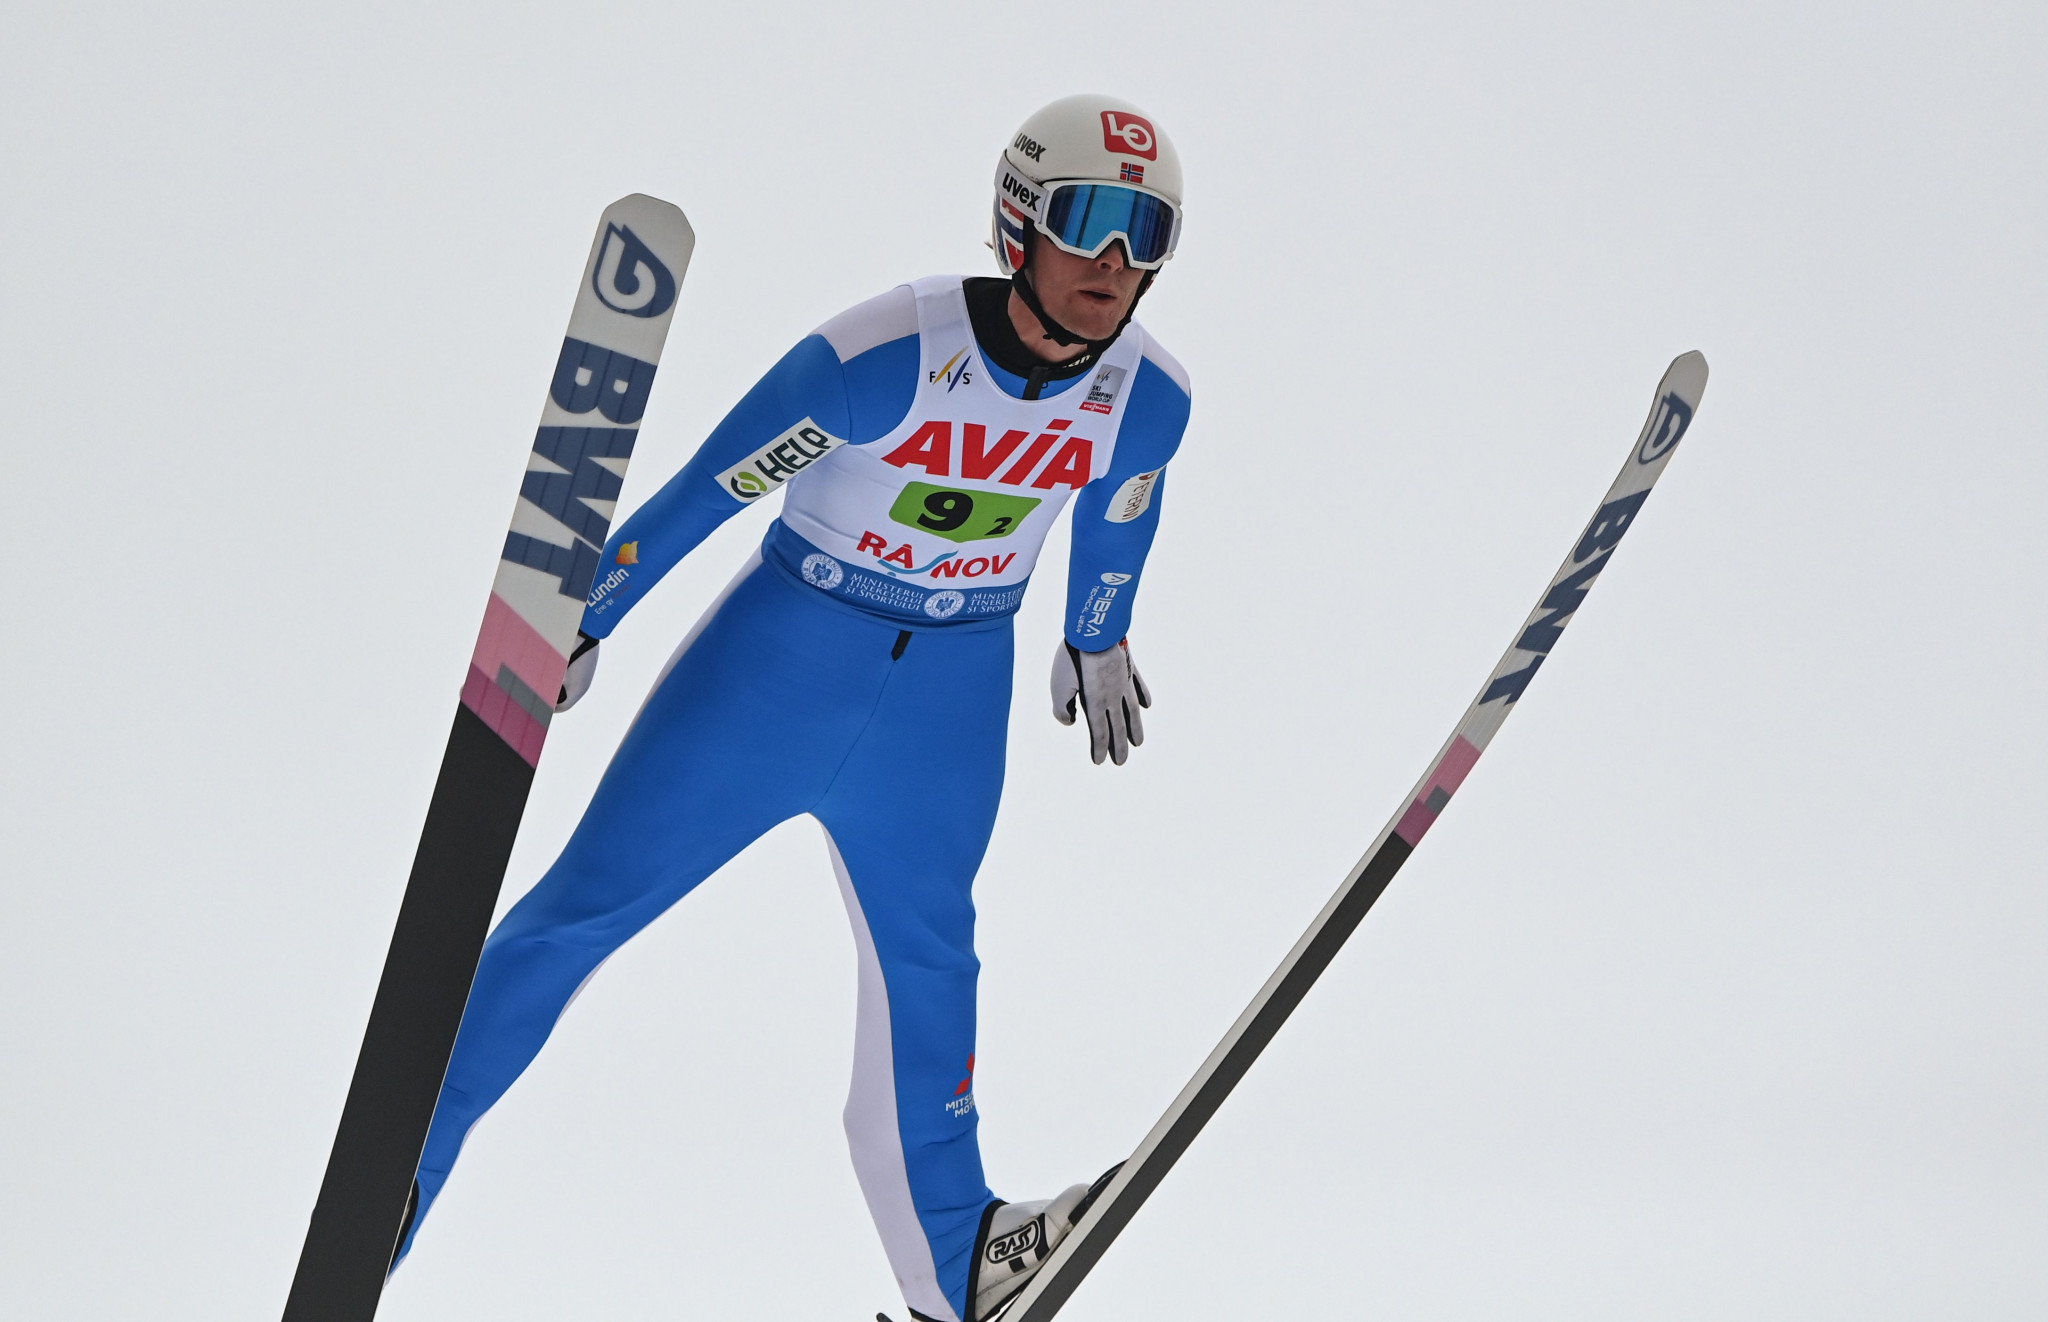 Tande wakes from medically induced coma after fall at Ski Jumping World Cup in Planica